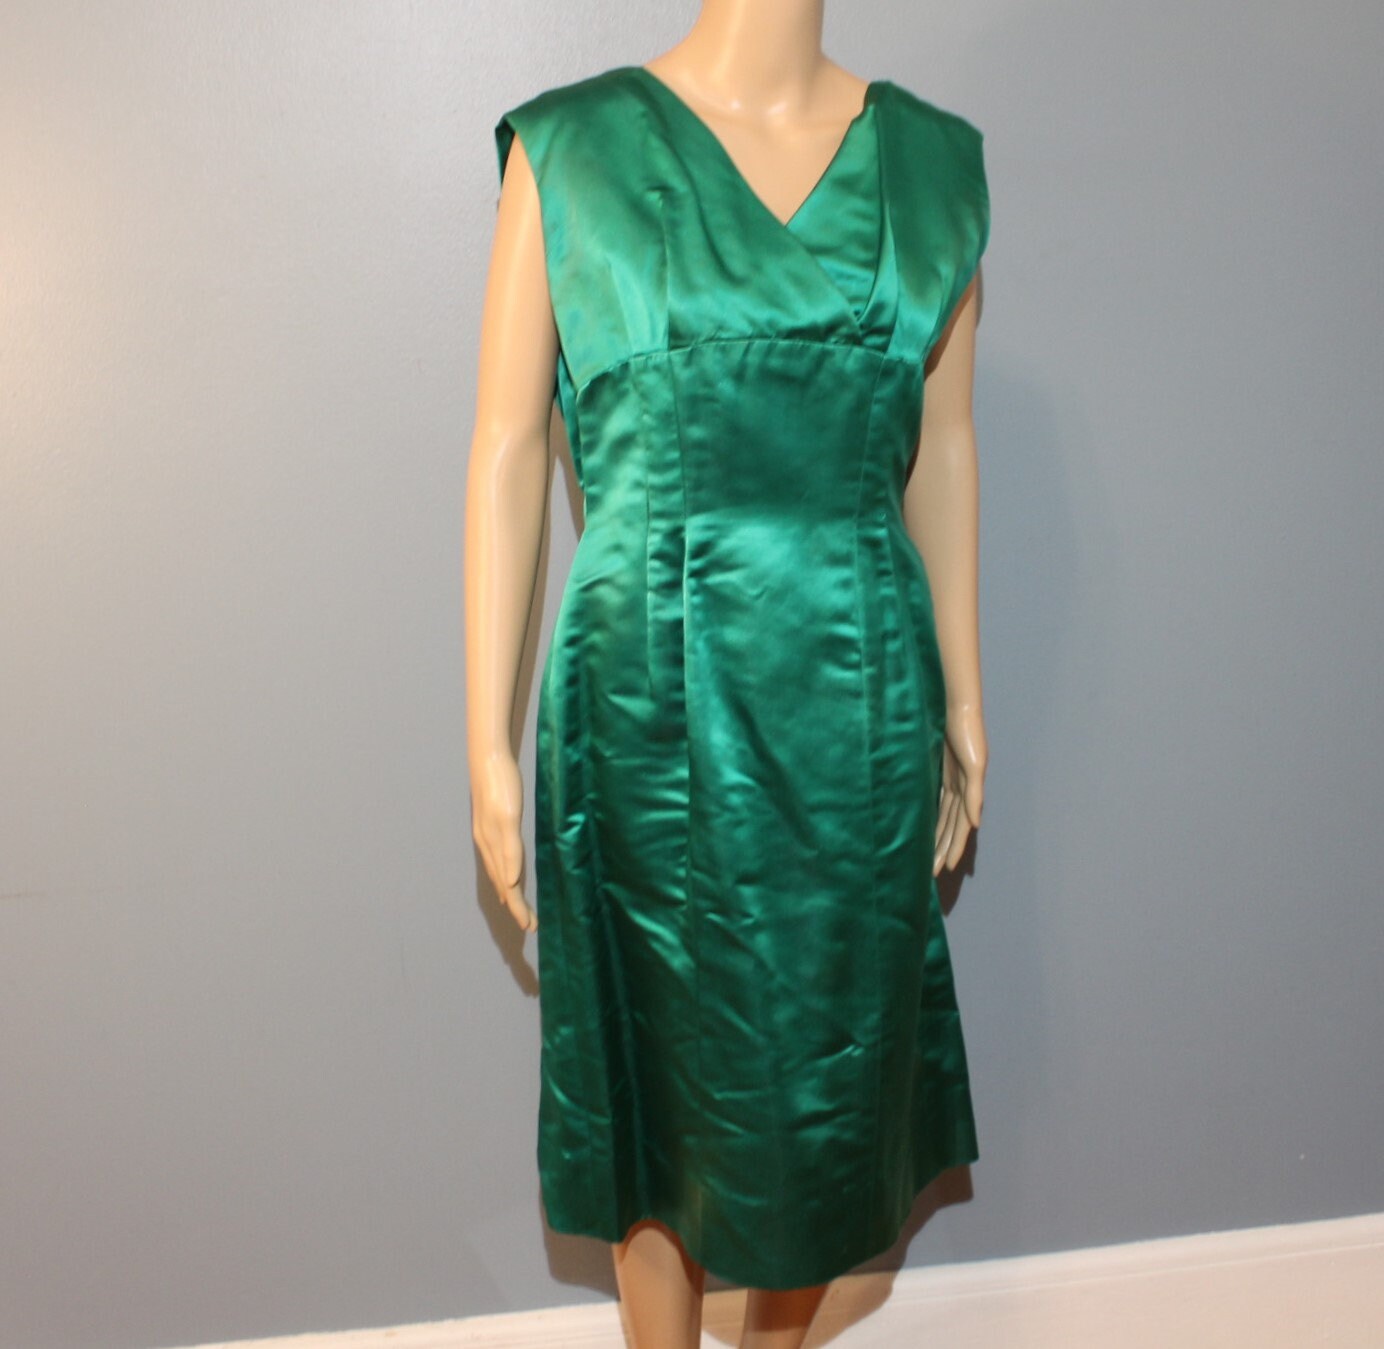 Vintage 1940's-1950's Hand Tailored Green Satin | Etsy